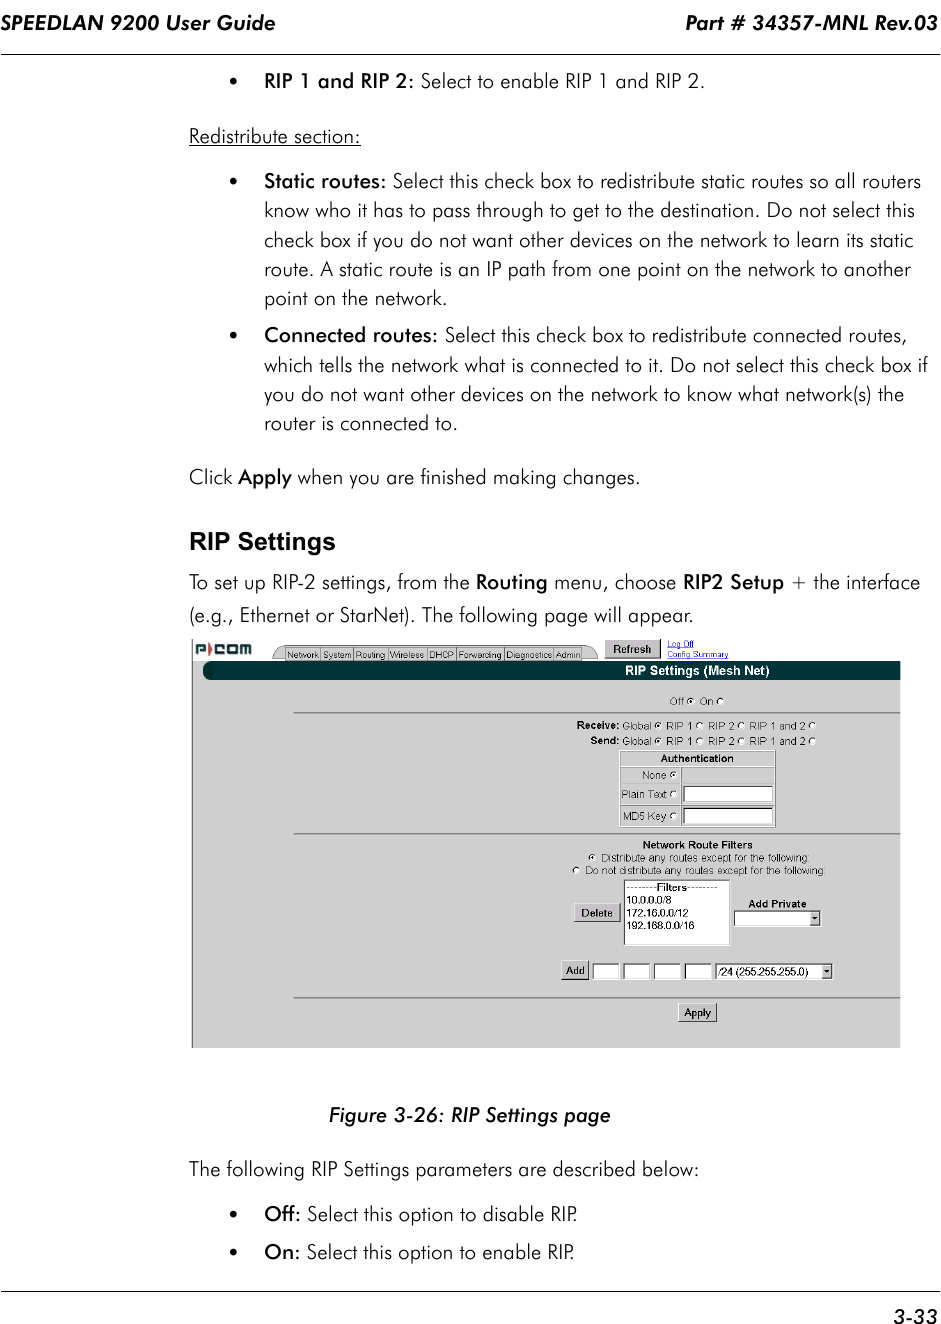 SPEEDLAN 9200 User Guide                                                                    Part # 34357-MNL Rev.03      3-33                                                                                                                                                              •RIP 1 and RIP 2: Select to enable RIP 1 and RIP 2.Redistribute section:•Static routes: Select this check box to redistribute static routes so all routers know who it has to pass through to get to the destination. Do not select this check box if you do not want other devices on the network to learn its static route. A static route is an IP path from one point on the network to another point on the network. •Connected routes: Select this check box to redistribute connected routes, which tells the network what is connected to it. Do not select this check box if you do not want other devices on the network to know what network(s) the router is connected to.Click Apply when you are finished making changes. RIP SettingsTo set up RIP-2 settings, from the Routing menu, choose RIP2 Setup + the interface (e.g., Ethernet or StarNet). The following page will appear.Figure 3-26: RIP Settings pageThe following RIP Settings parameters are described below:•Off: Select this option to disable RIP.•On: Select this option to enable RIP. 